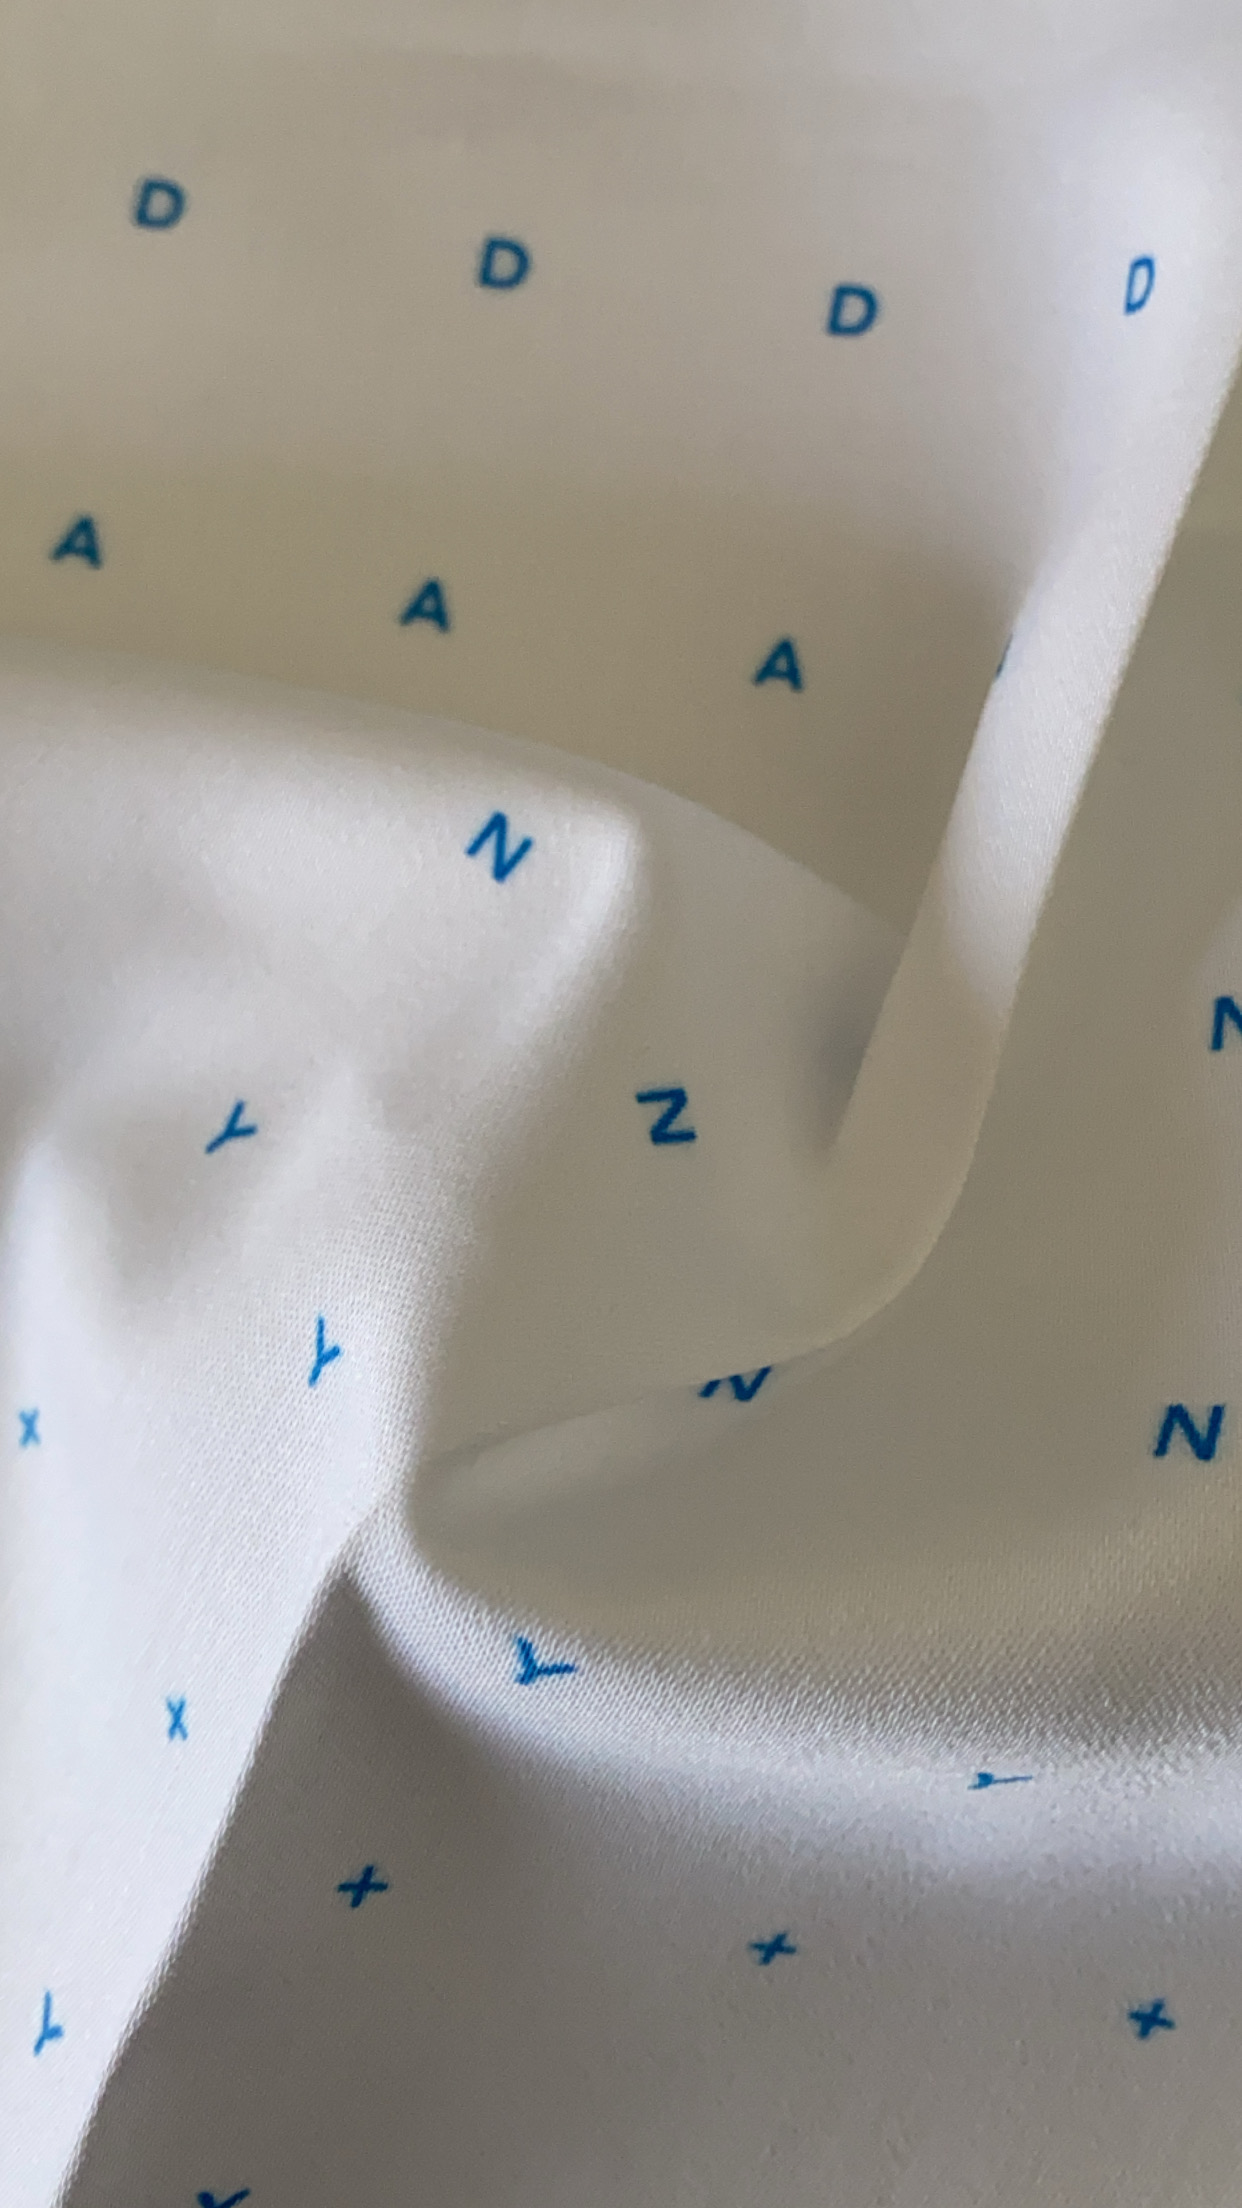 Custom branded print on fabric inspired by drafting paper.